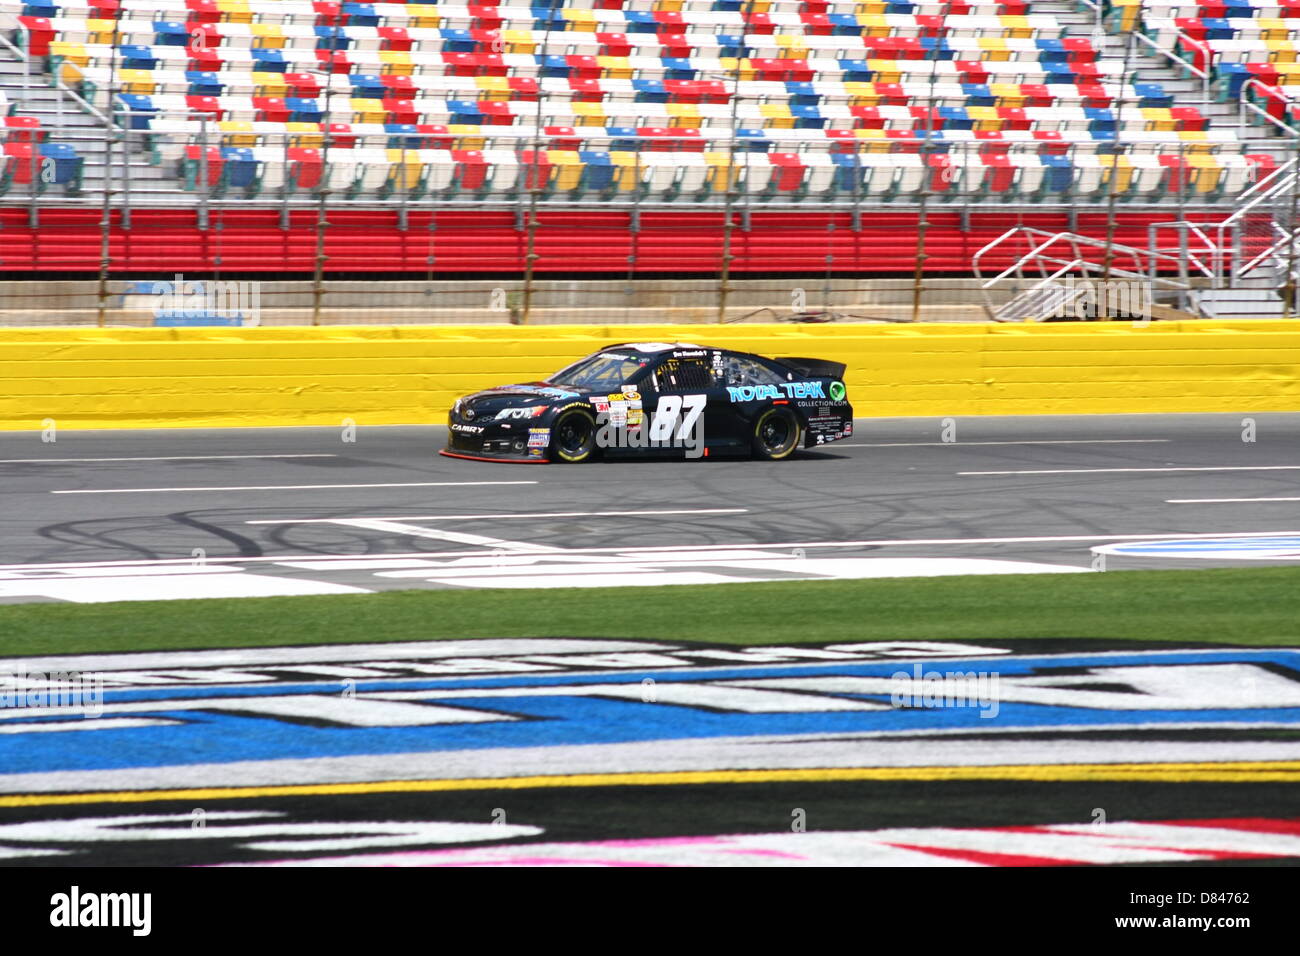 Charlotte, USA. 17th May, 2013. Joe Nemechek passes the grandstand during final practice for the Sprint Showdown at Charlotte Motor Speedway on May 17, 2013. Credit: Alamy Live News Stock Photo